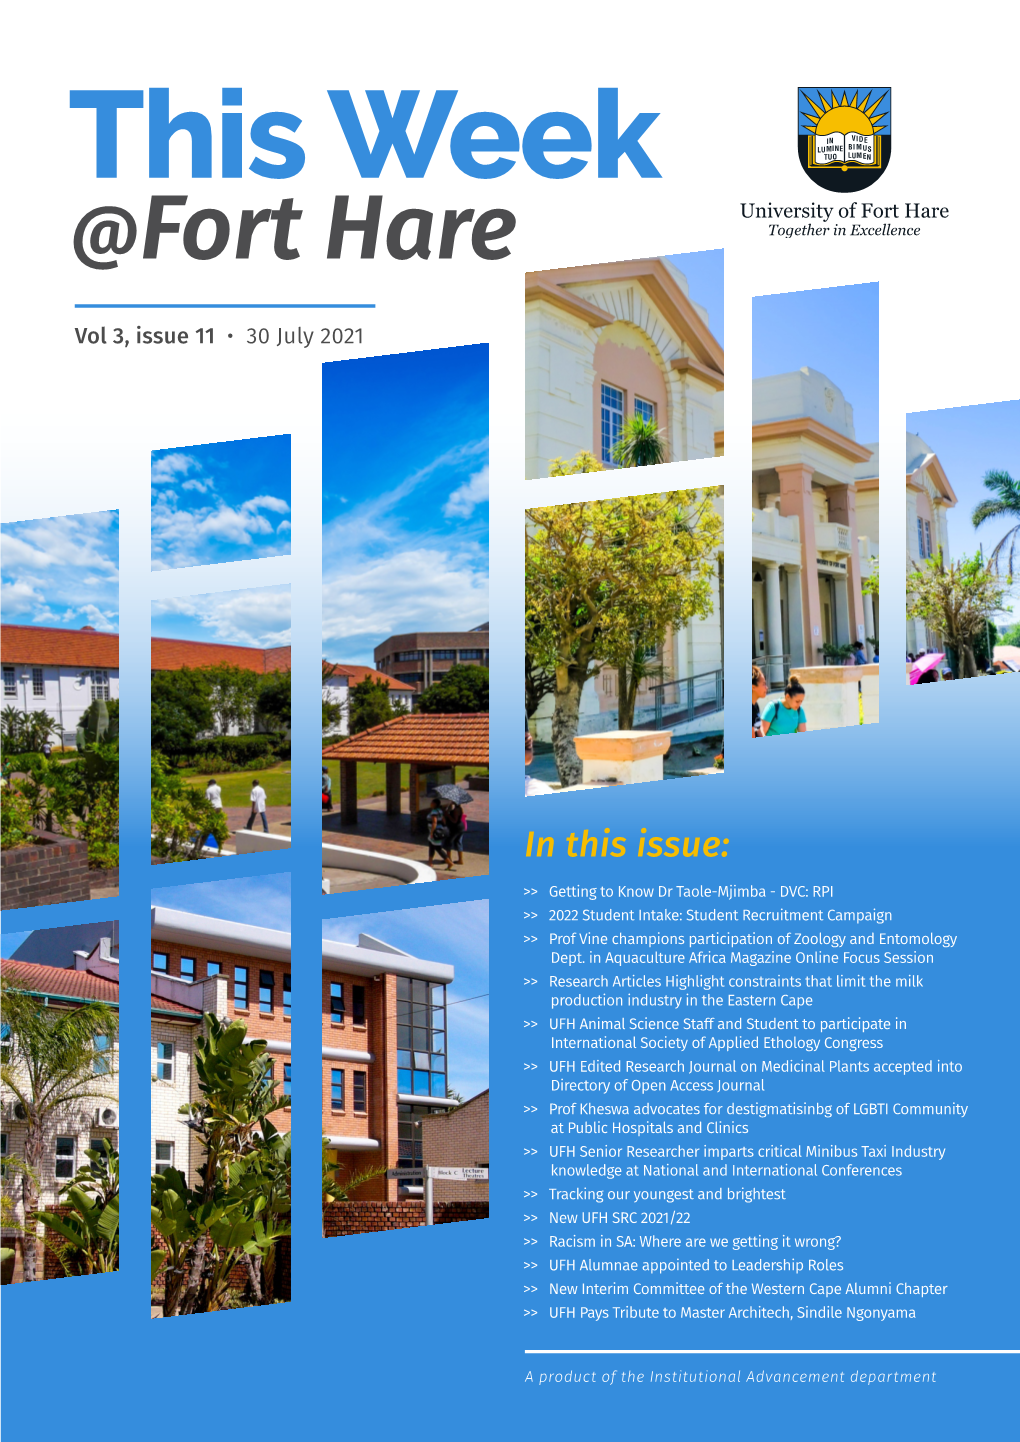 Thisweek@Forthare Vol 3 Issue 11